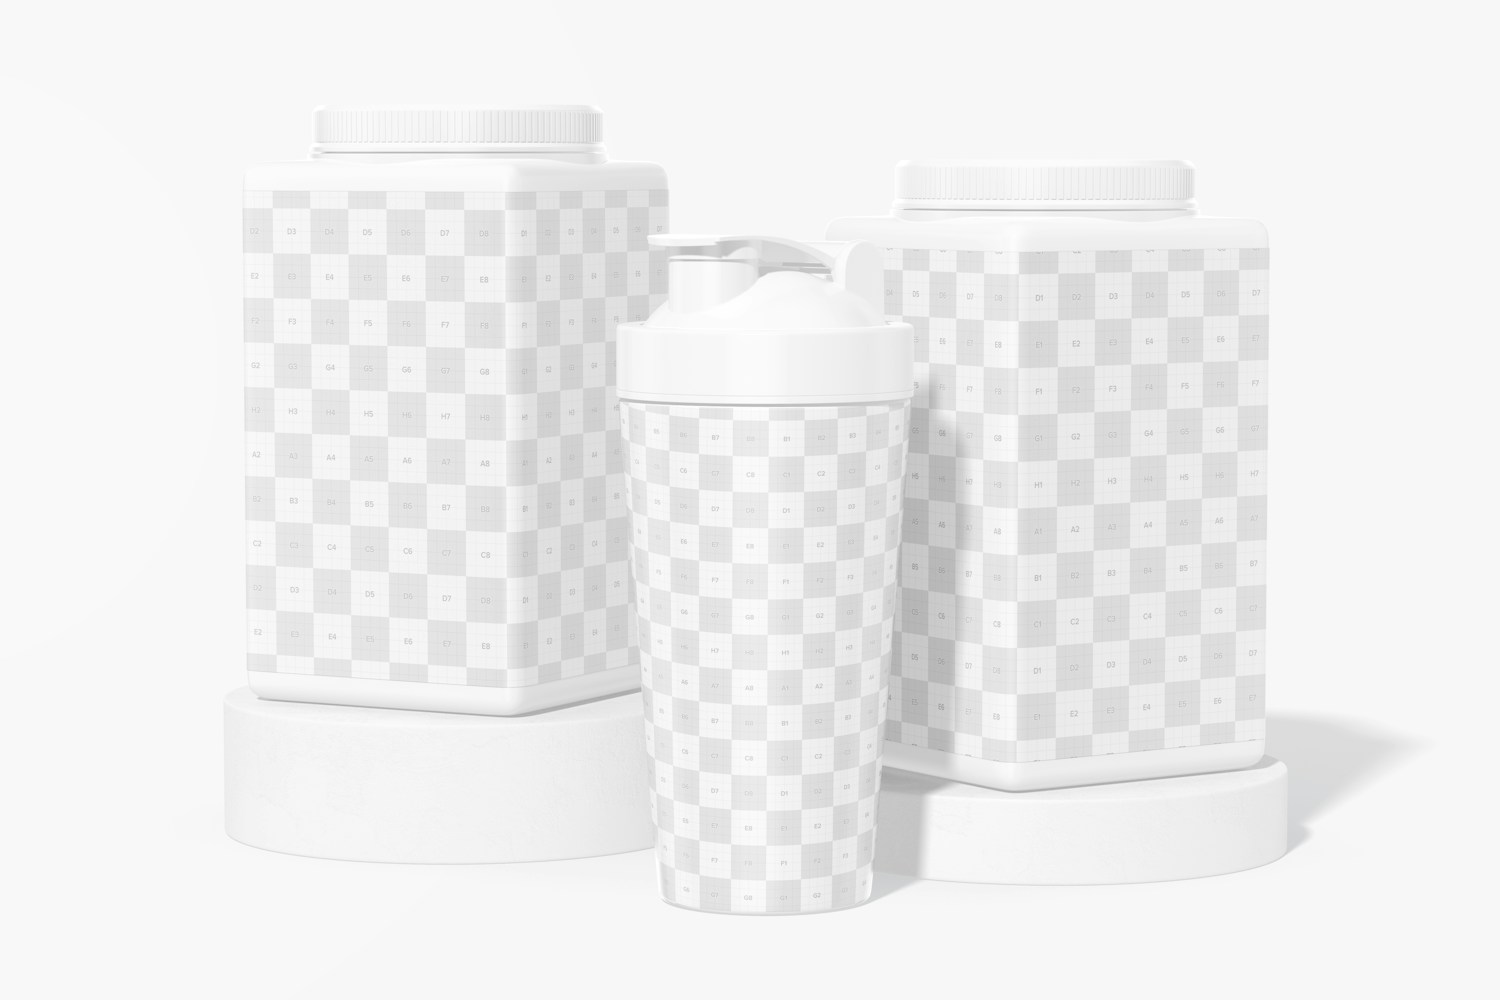 Square Protein Powder Containers Mockup